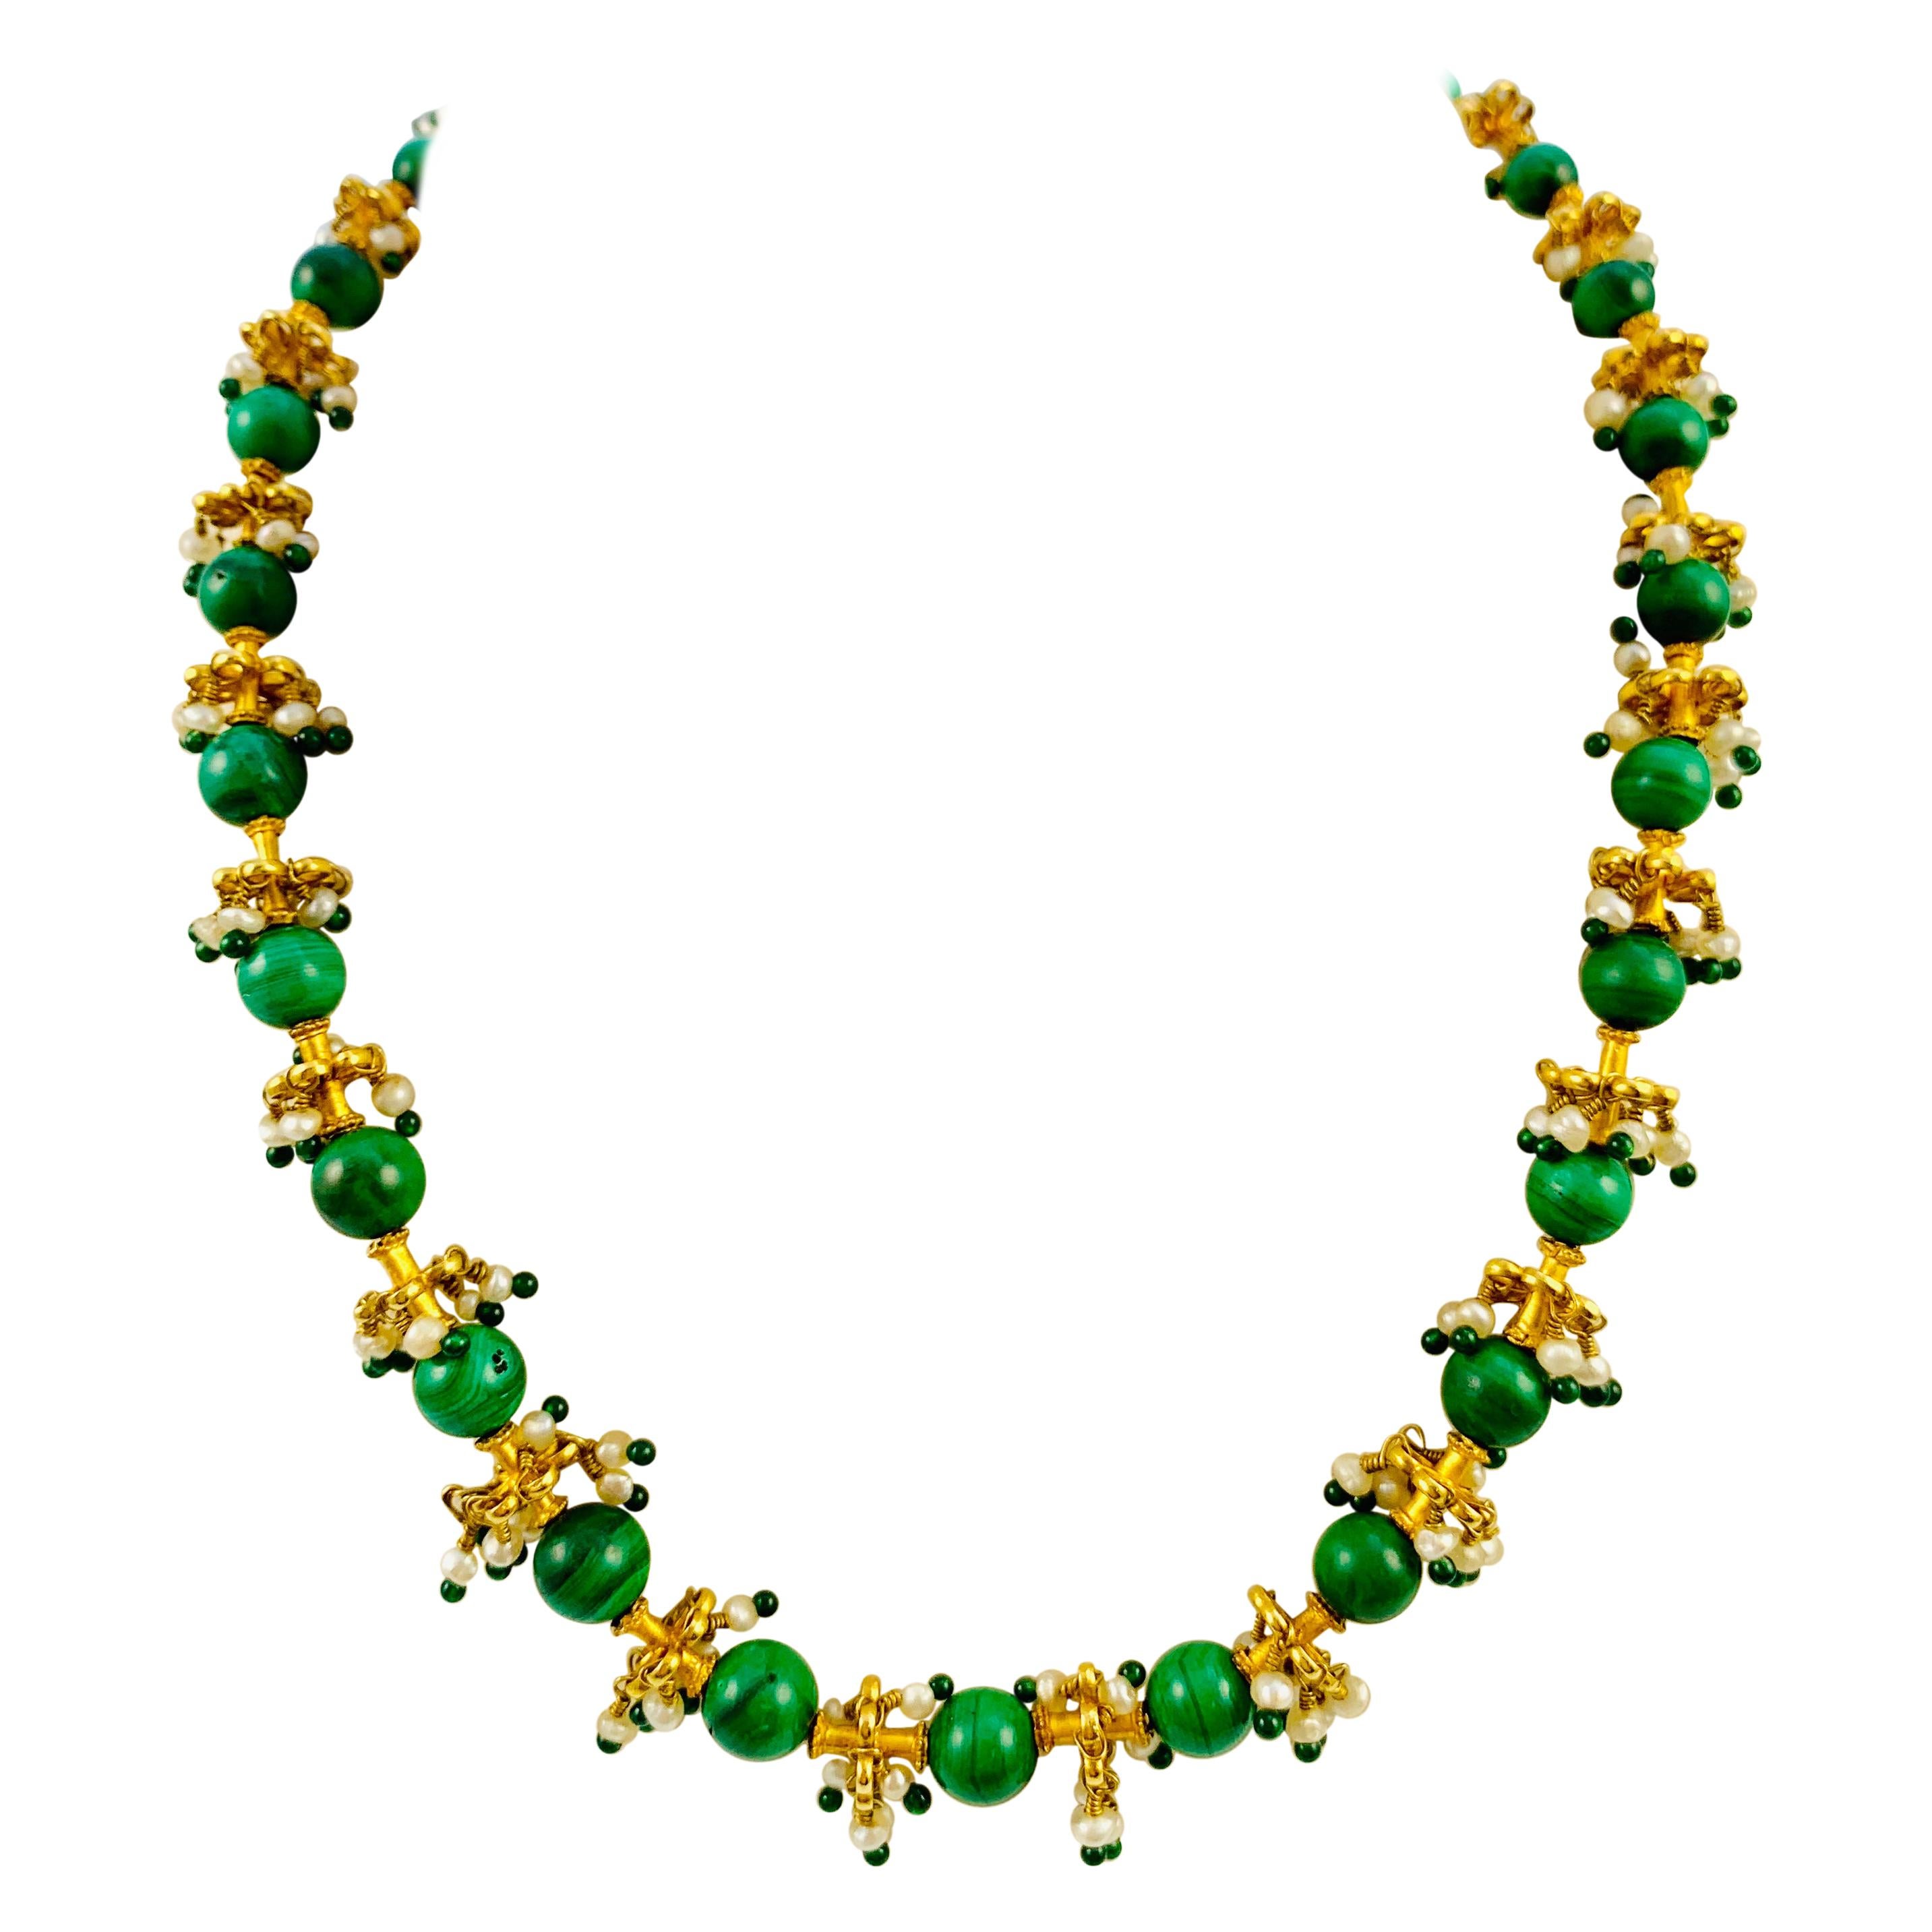 Middle Eastern 22 Karat Yellow Gold, Malachite, Pearl and Emerald Bead Necklace